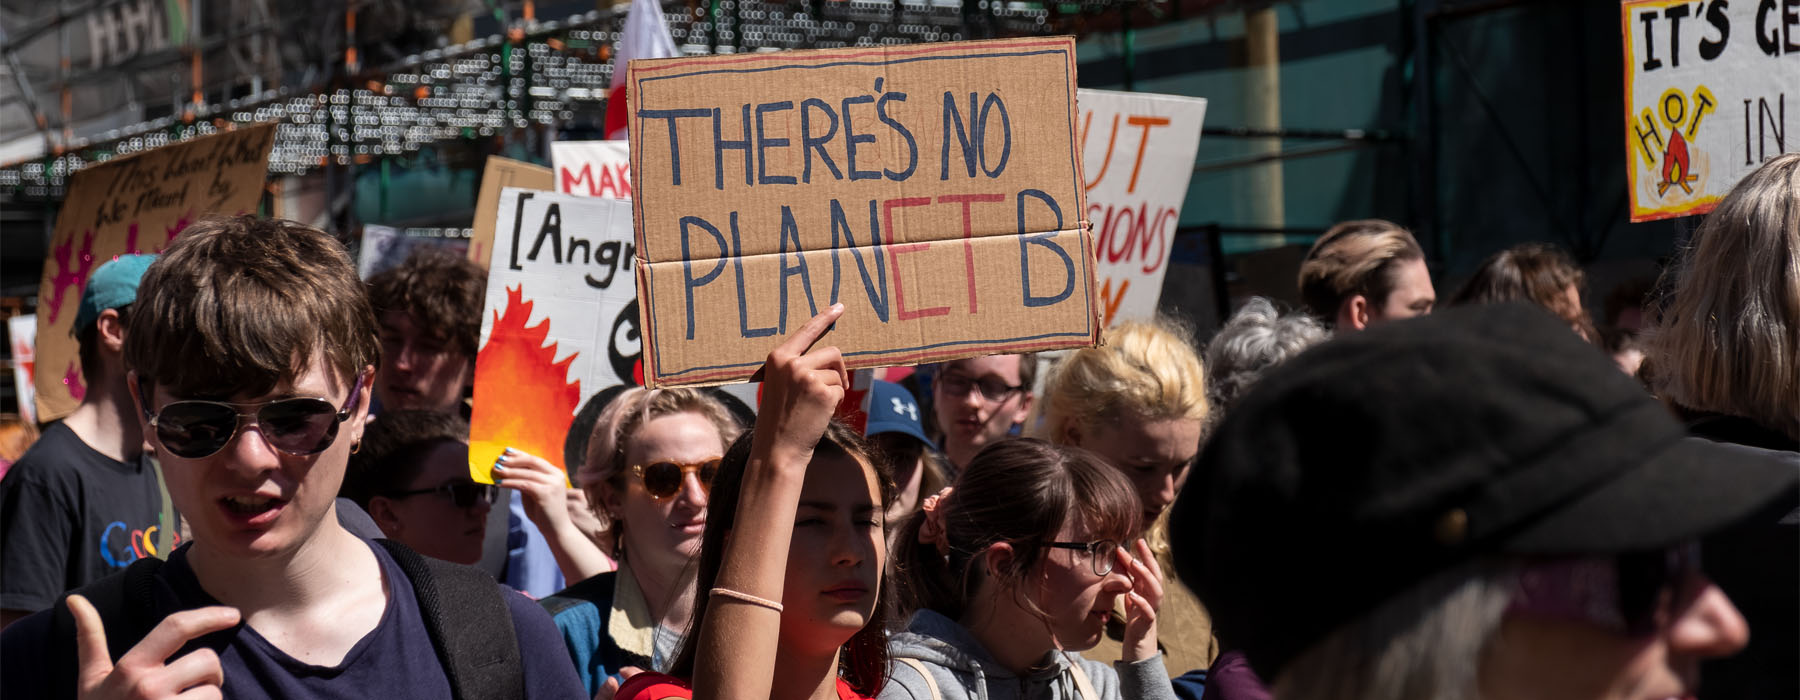 People marching down a street. A young woman holds up a sign that says “There’s no Planet B”